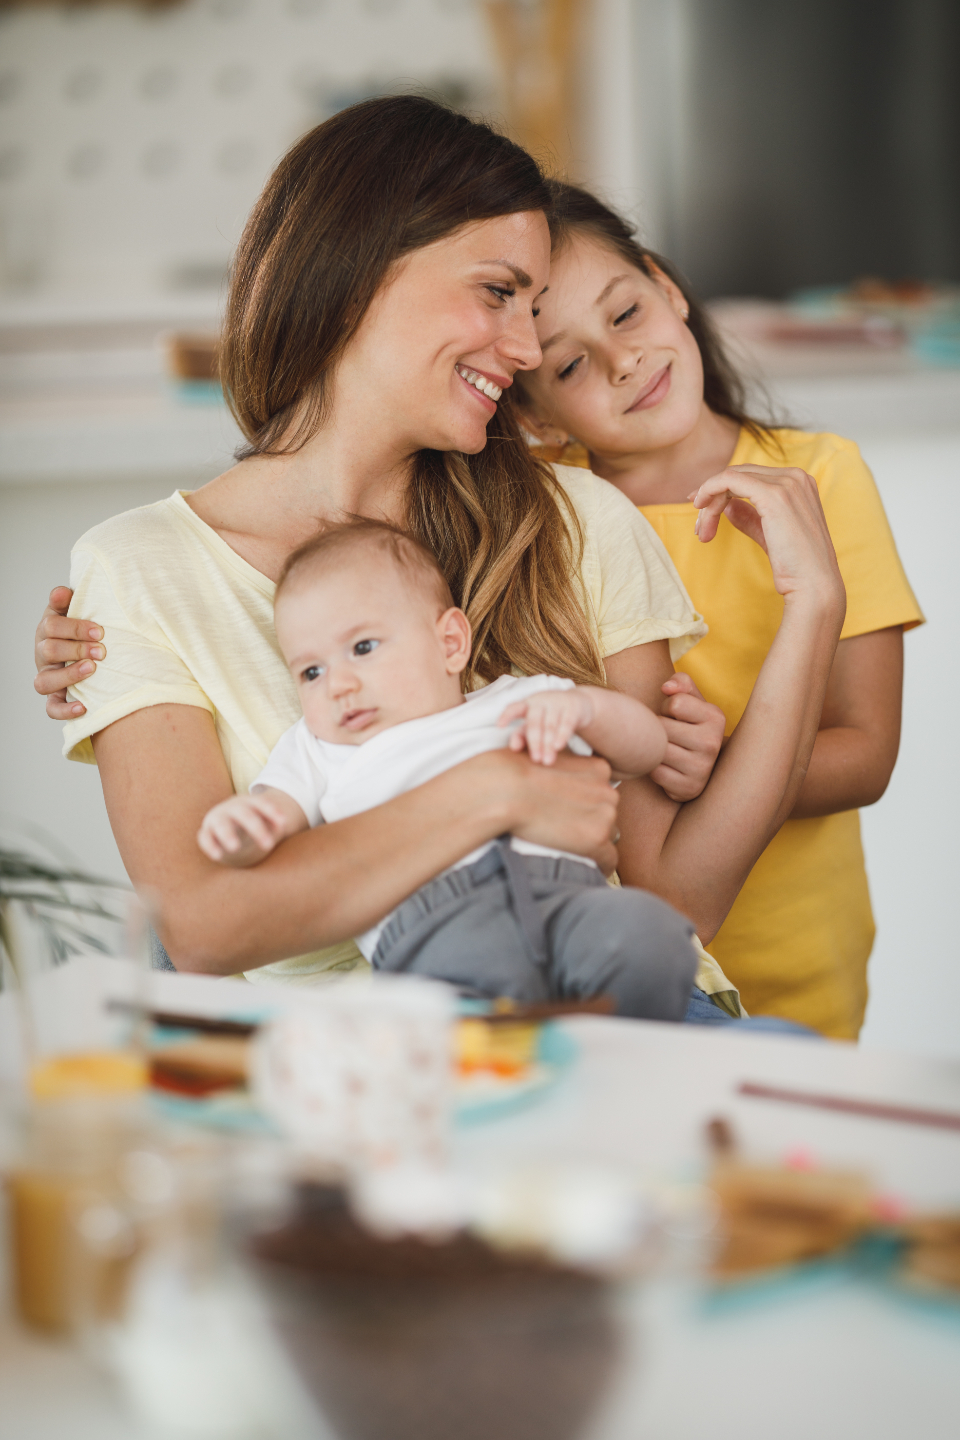 Tips To Be A Great Mother Love Your Child Unconditionally